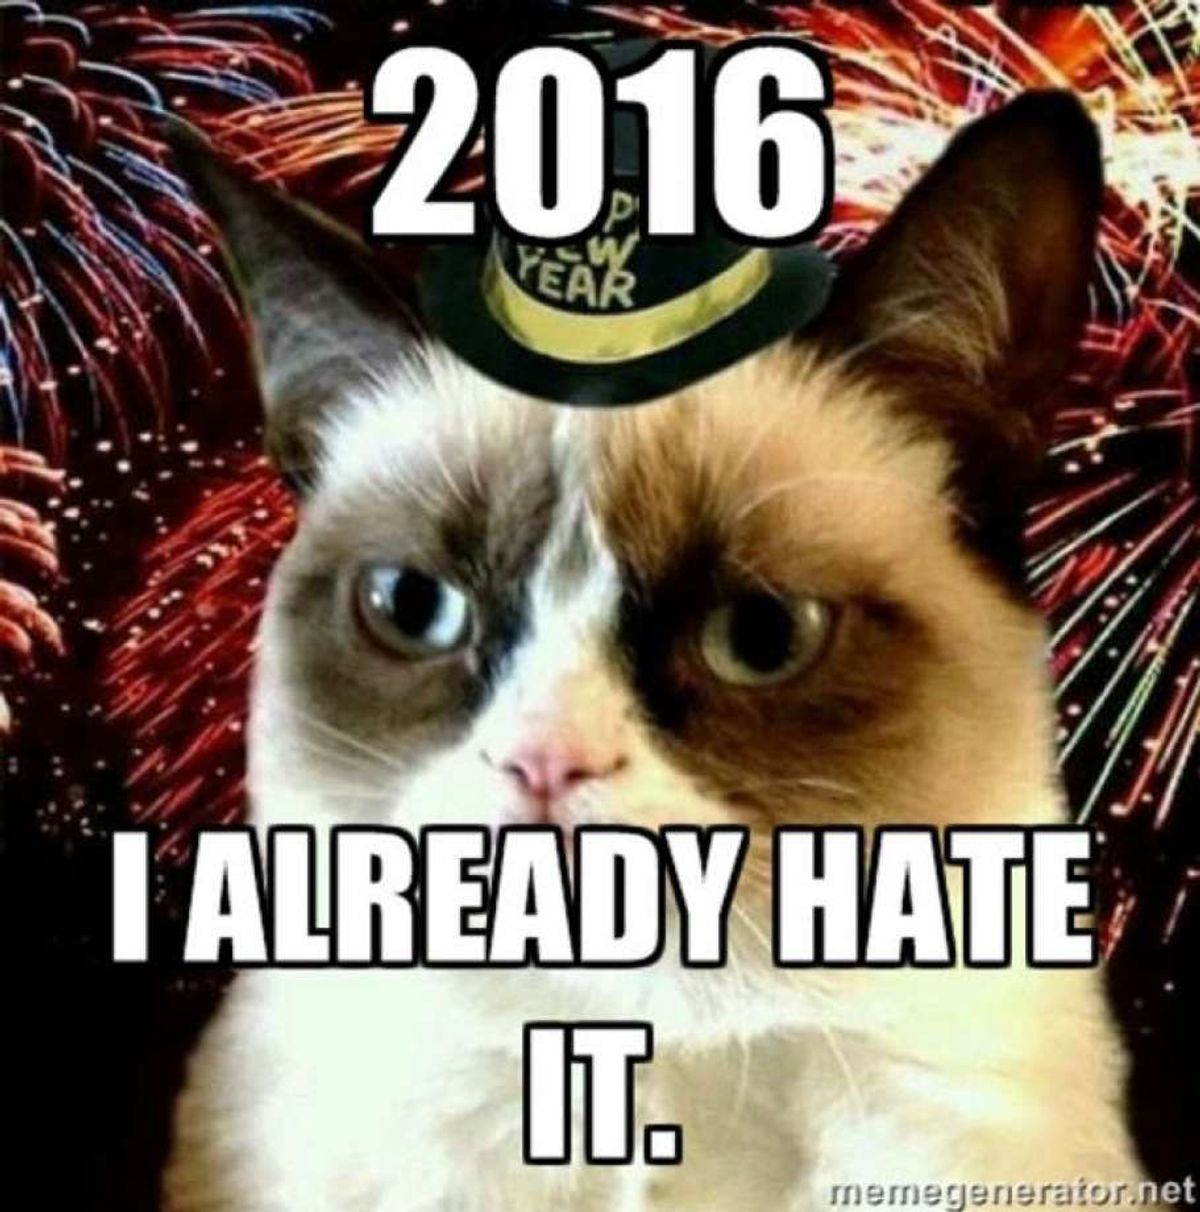 F You 2016!